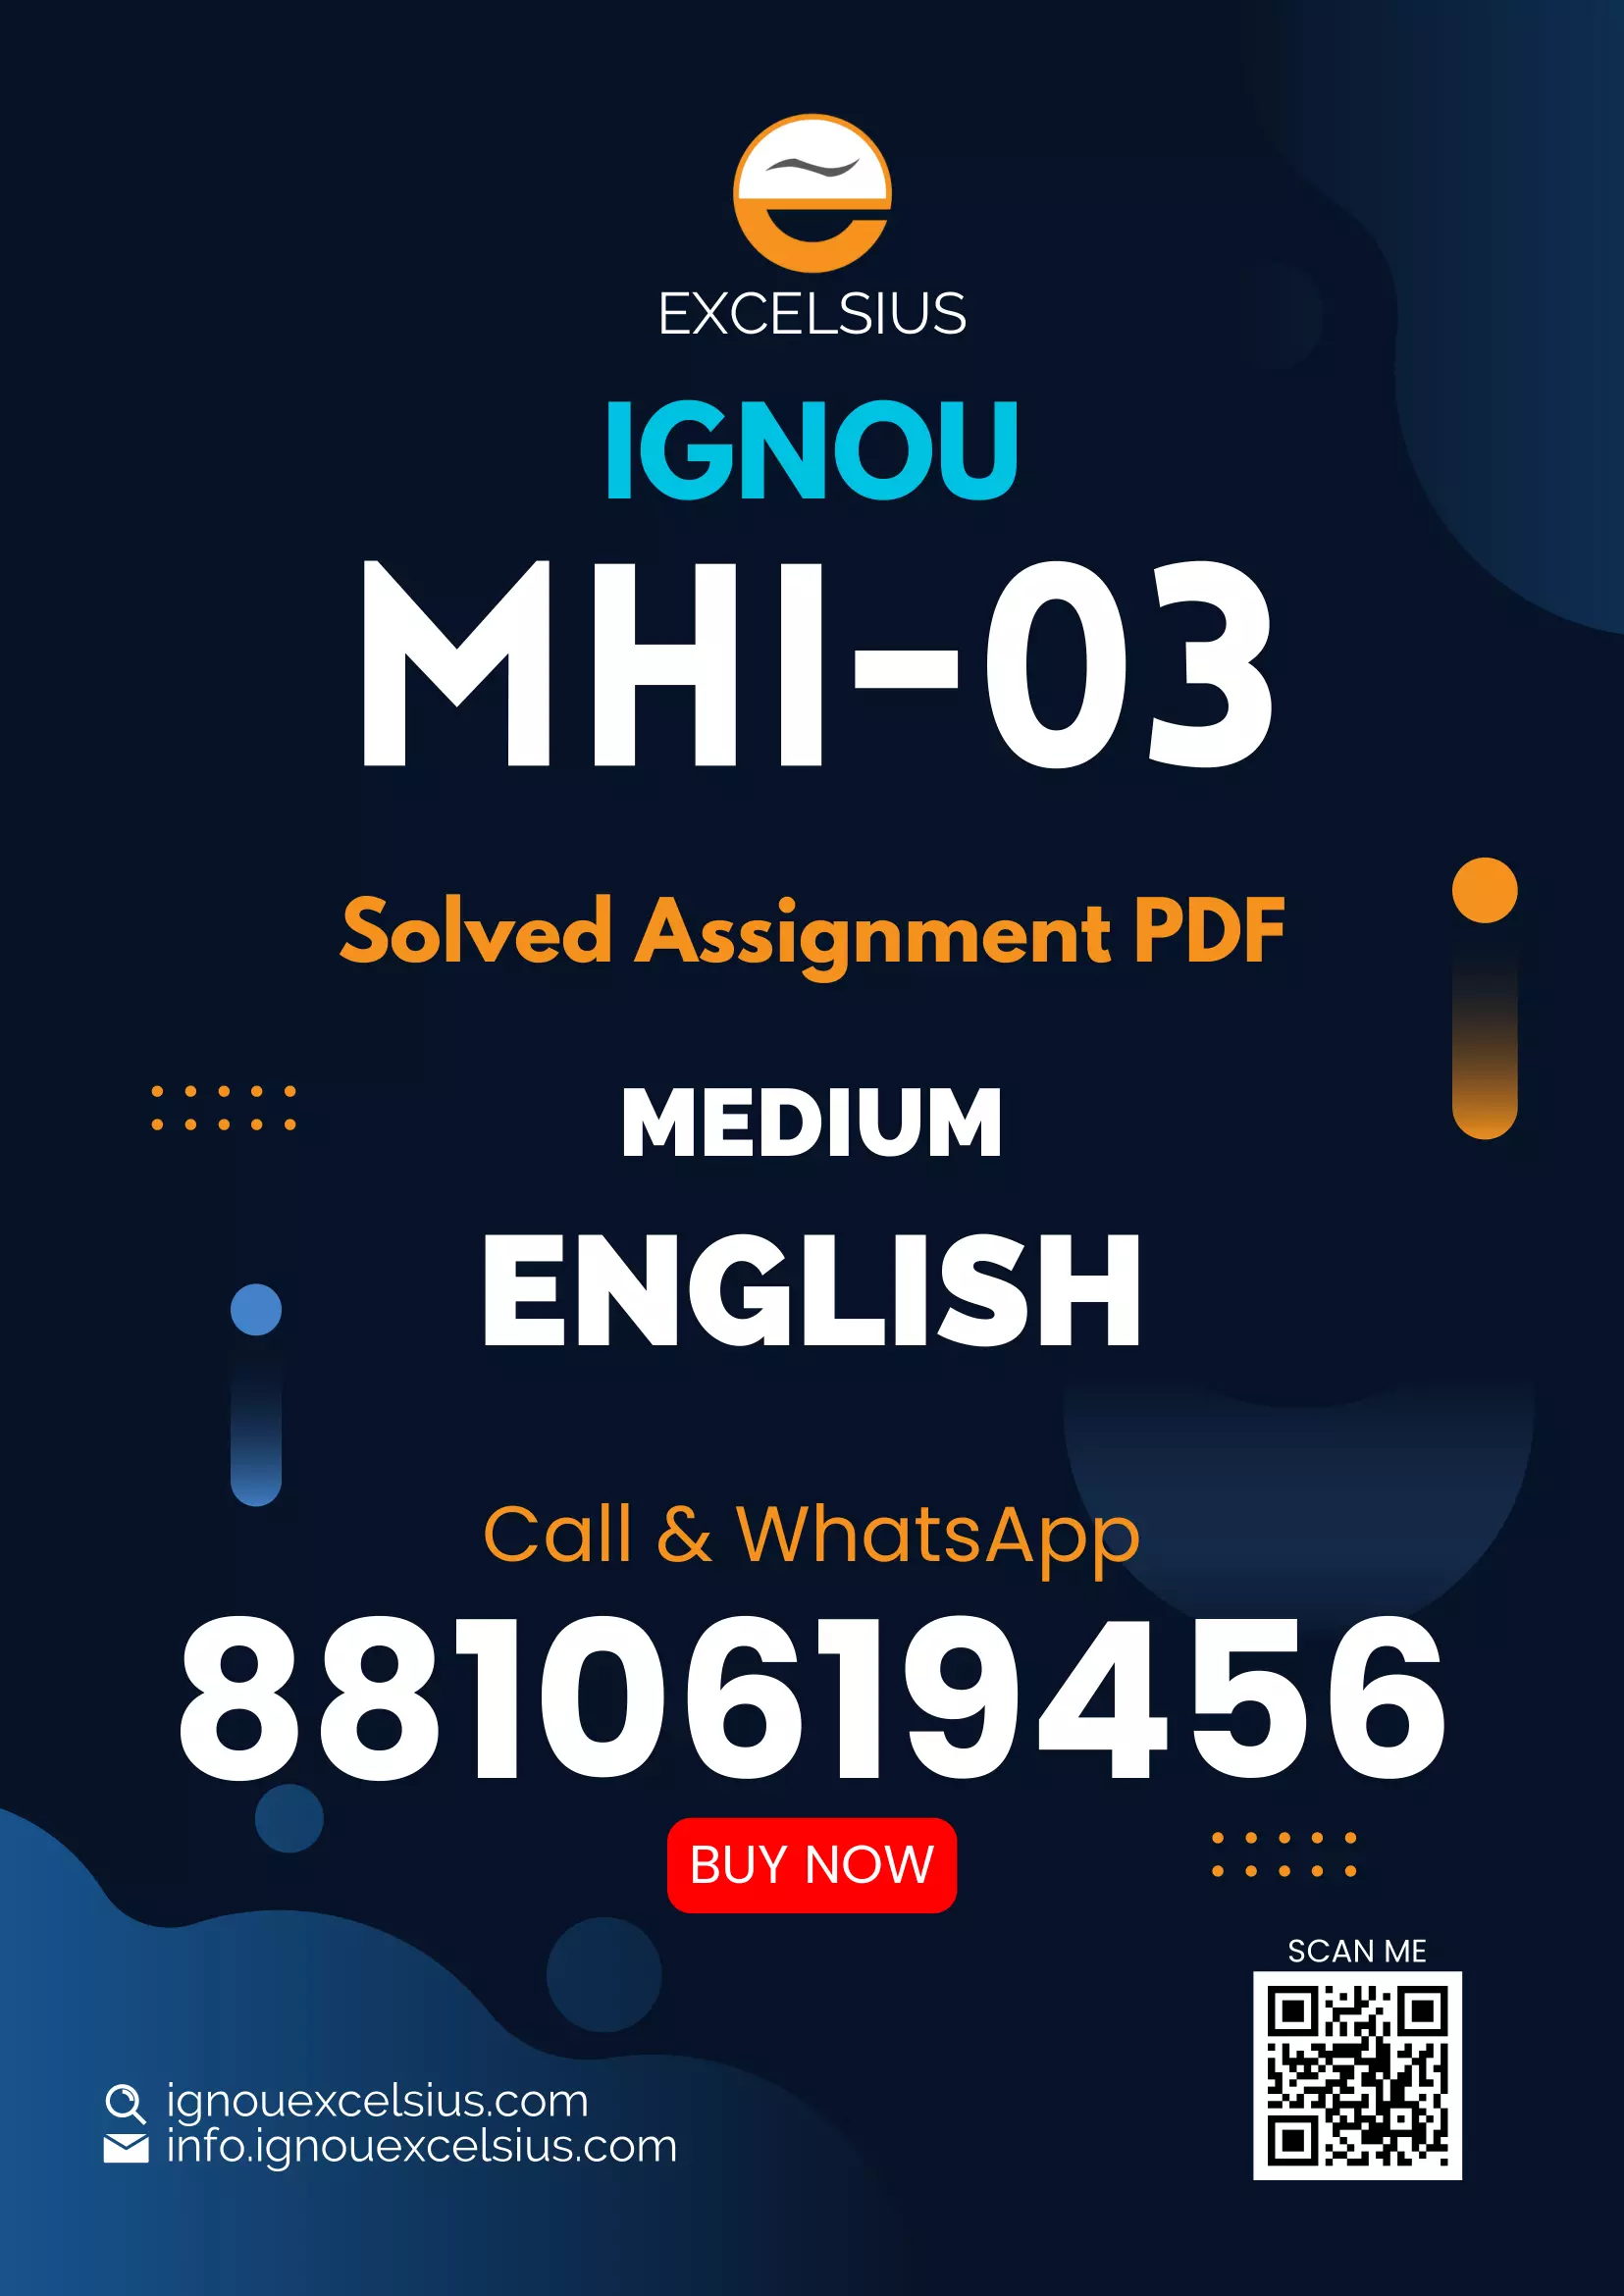 IGNOU MHI-03 - Historiography Latest Solved Assignment-July 2022 – January 2023